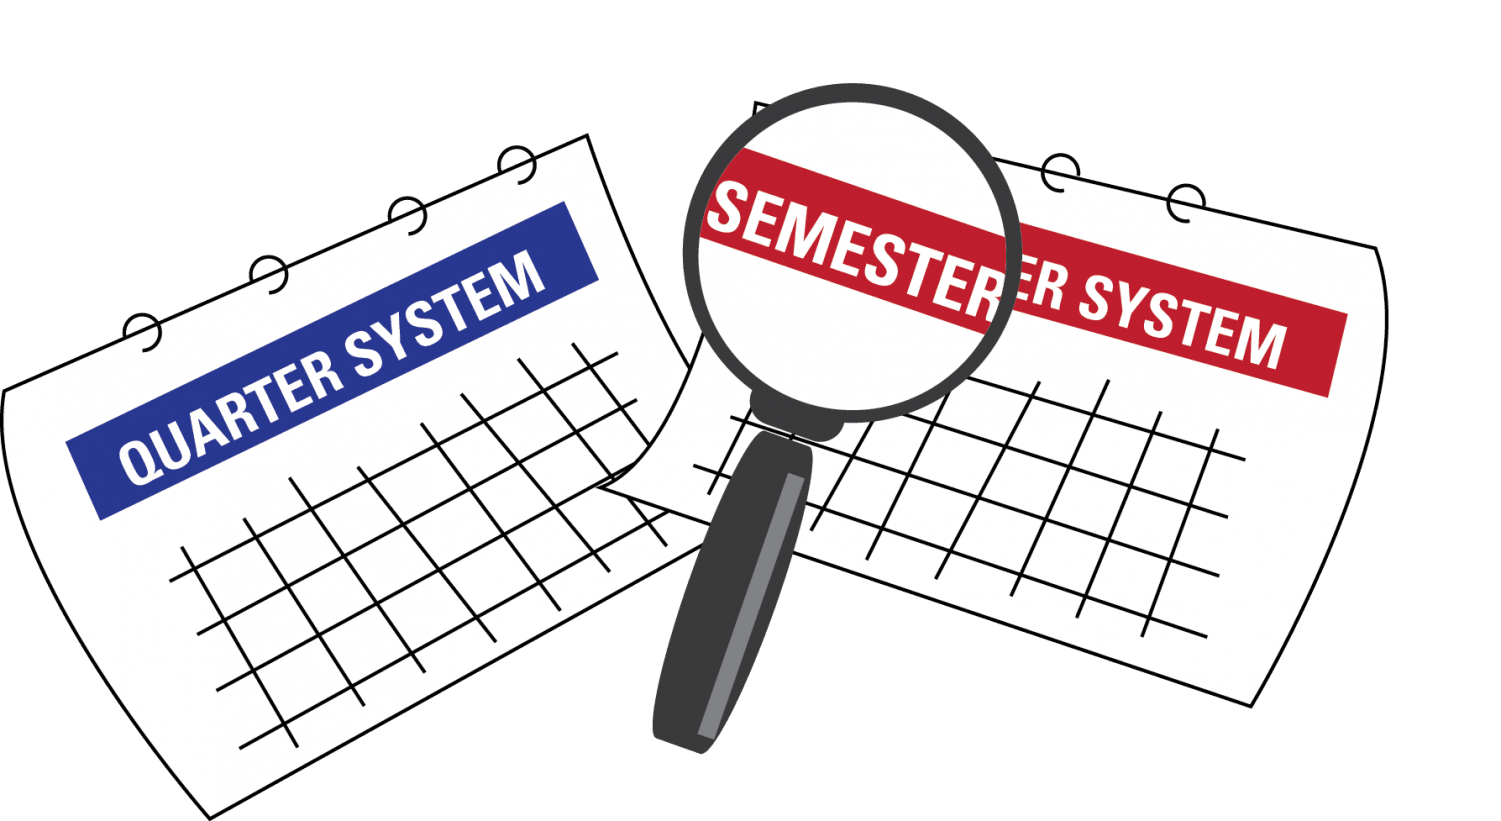 Task force to explore potential switch from quarter system to semesters